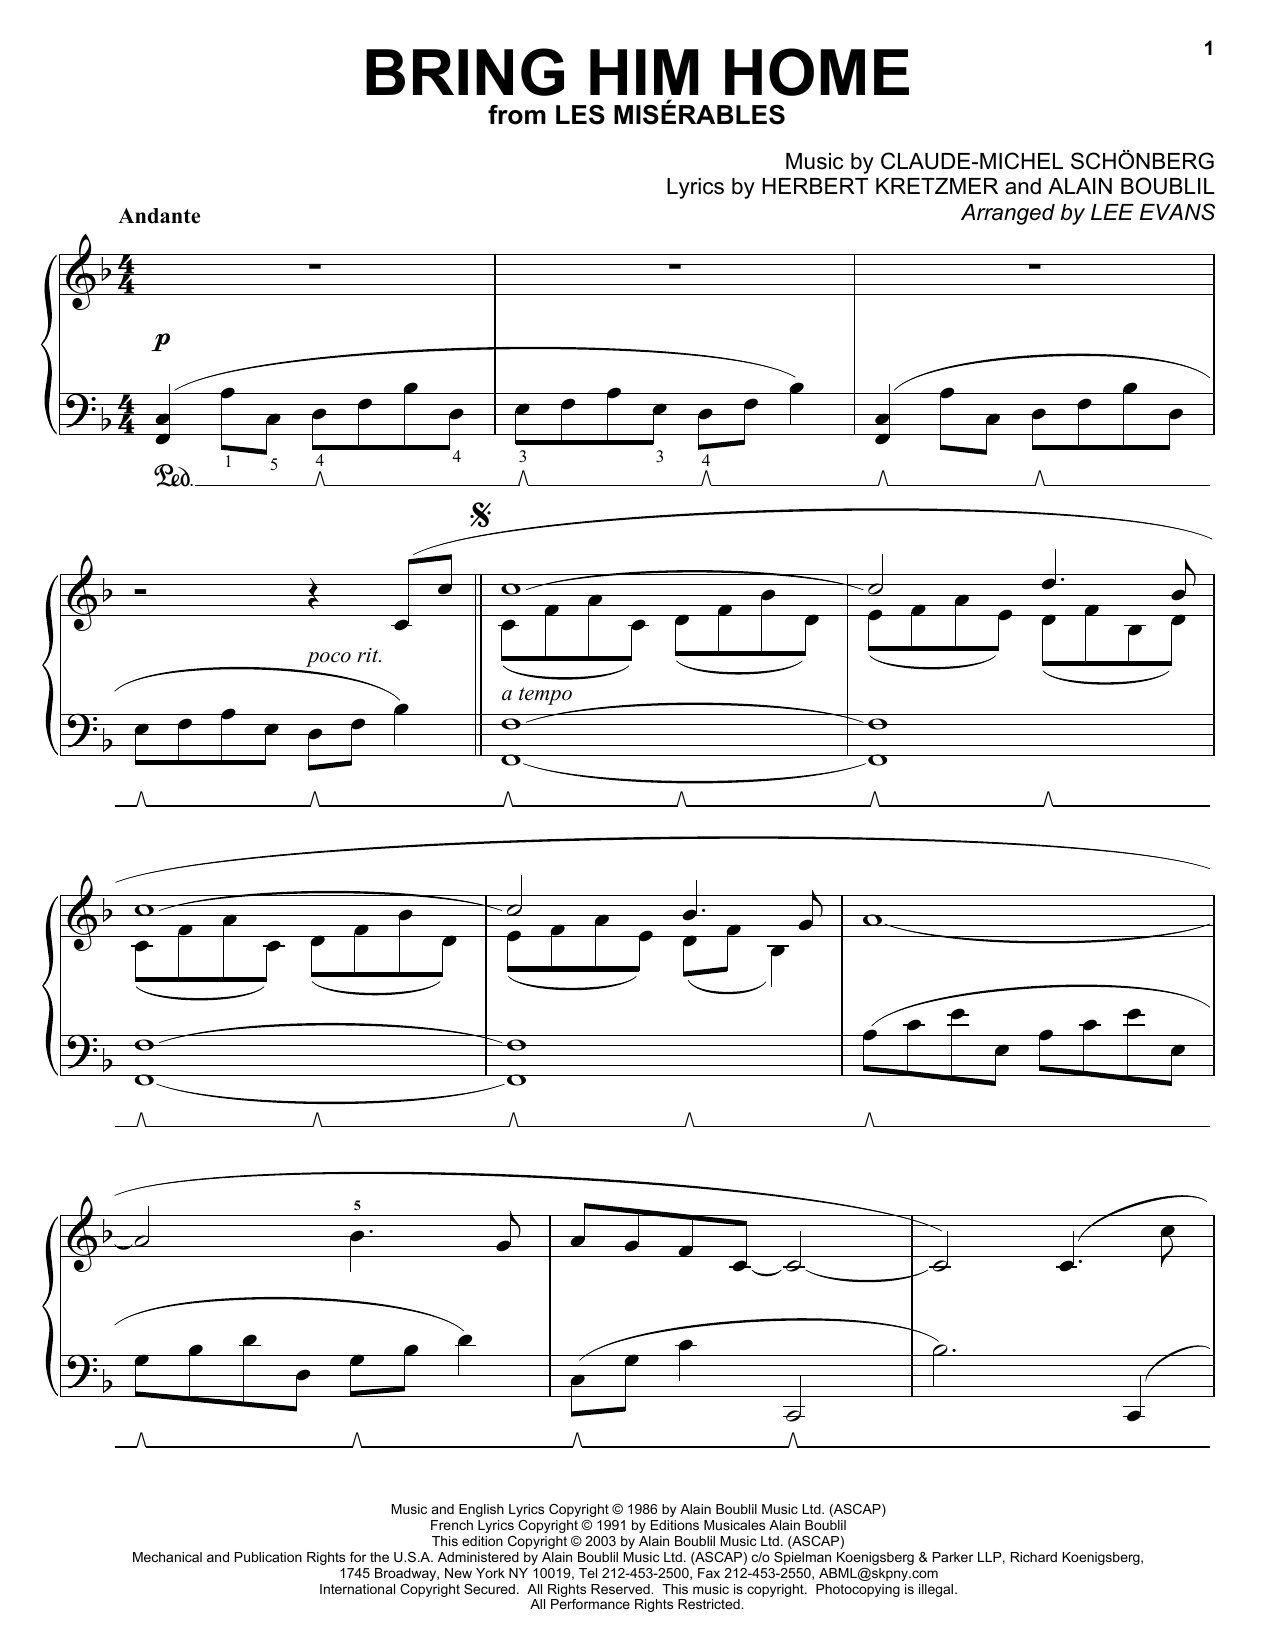 Alain Boublil Bring Him Home (from Les Miserables) sheet music notes and chords. Download Printable PDF.